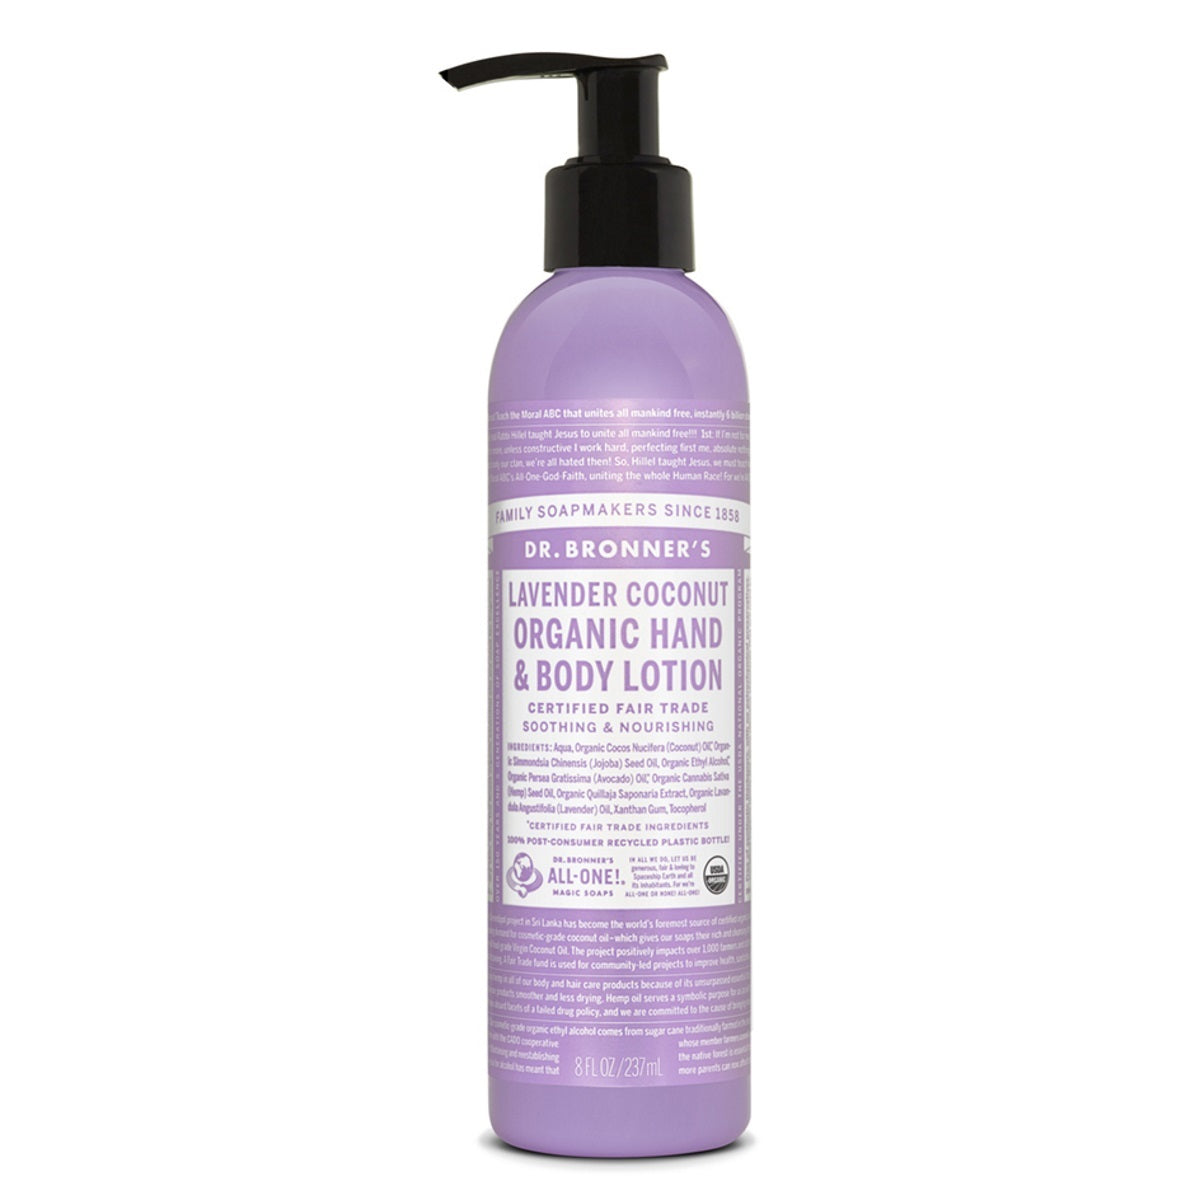 Primary image of Lavender Coconut Organic Hand  Body Lotion